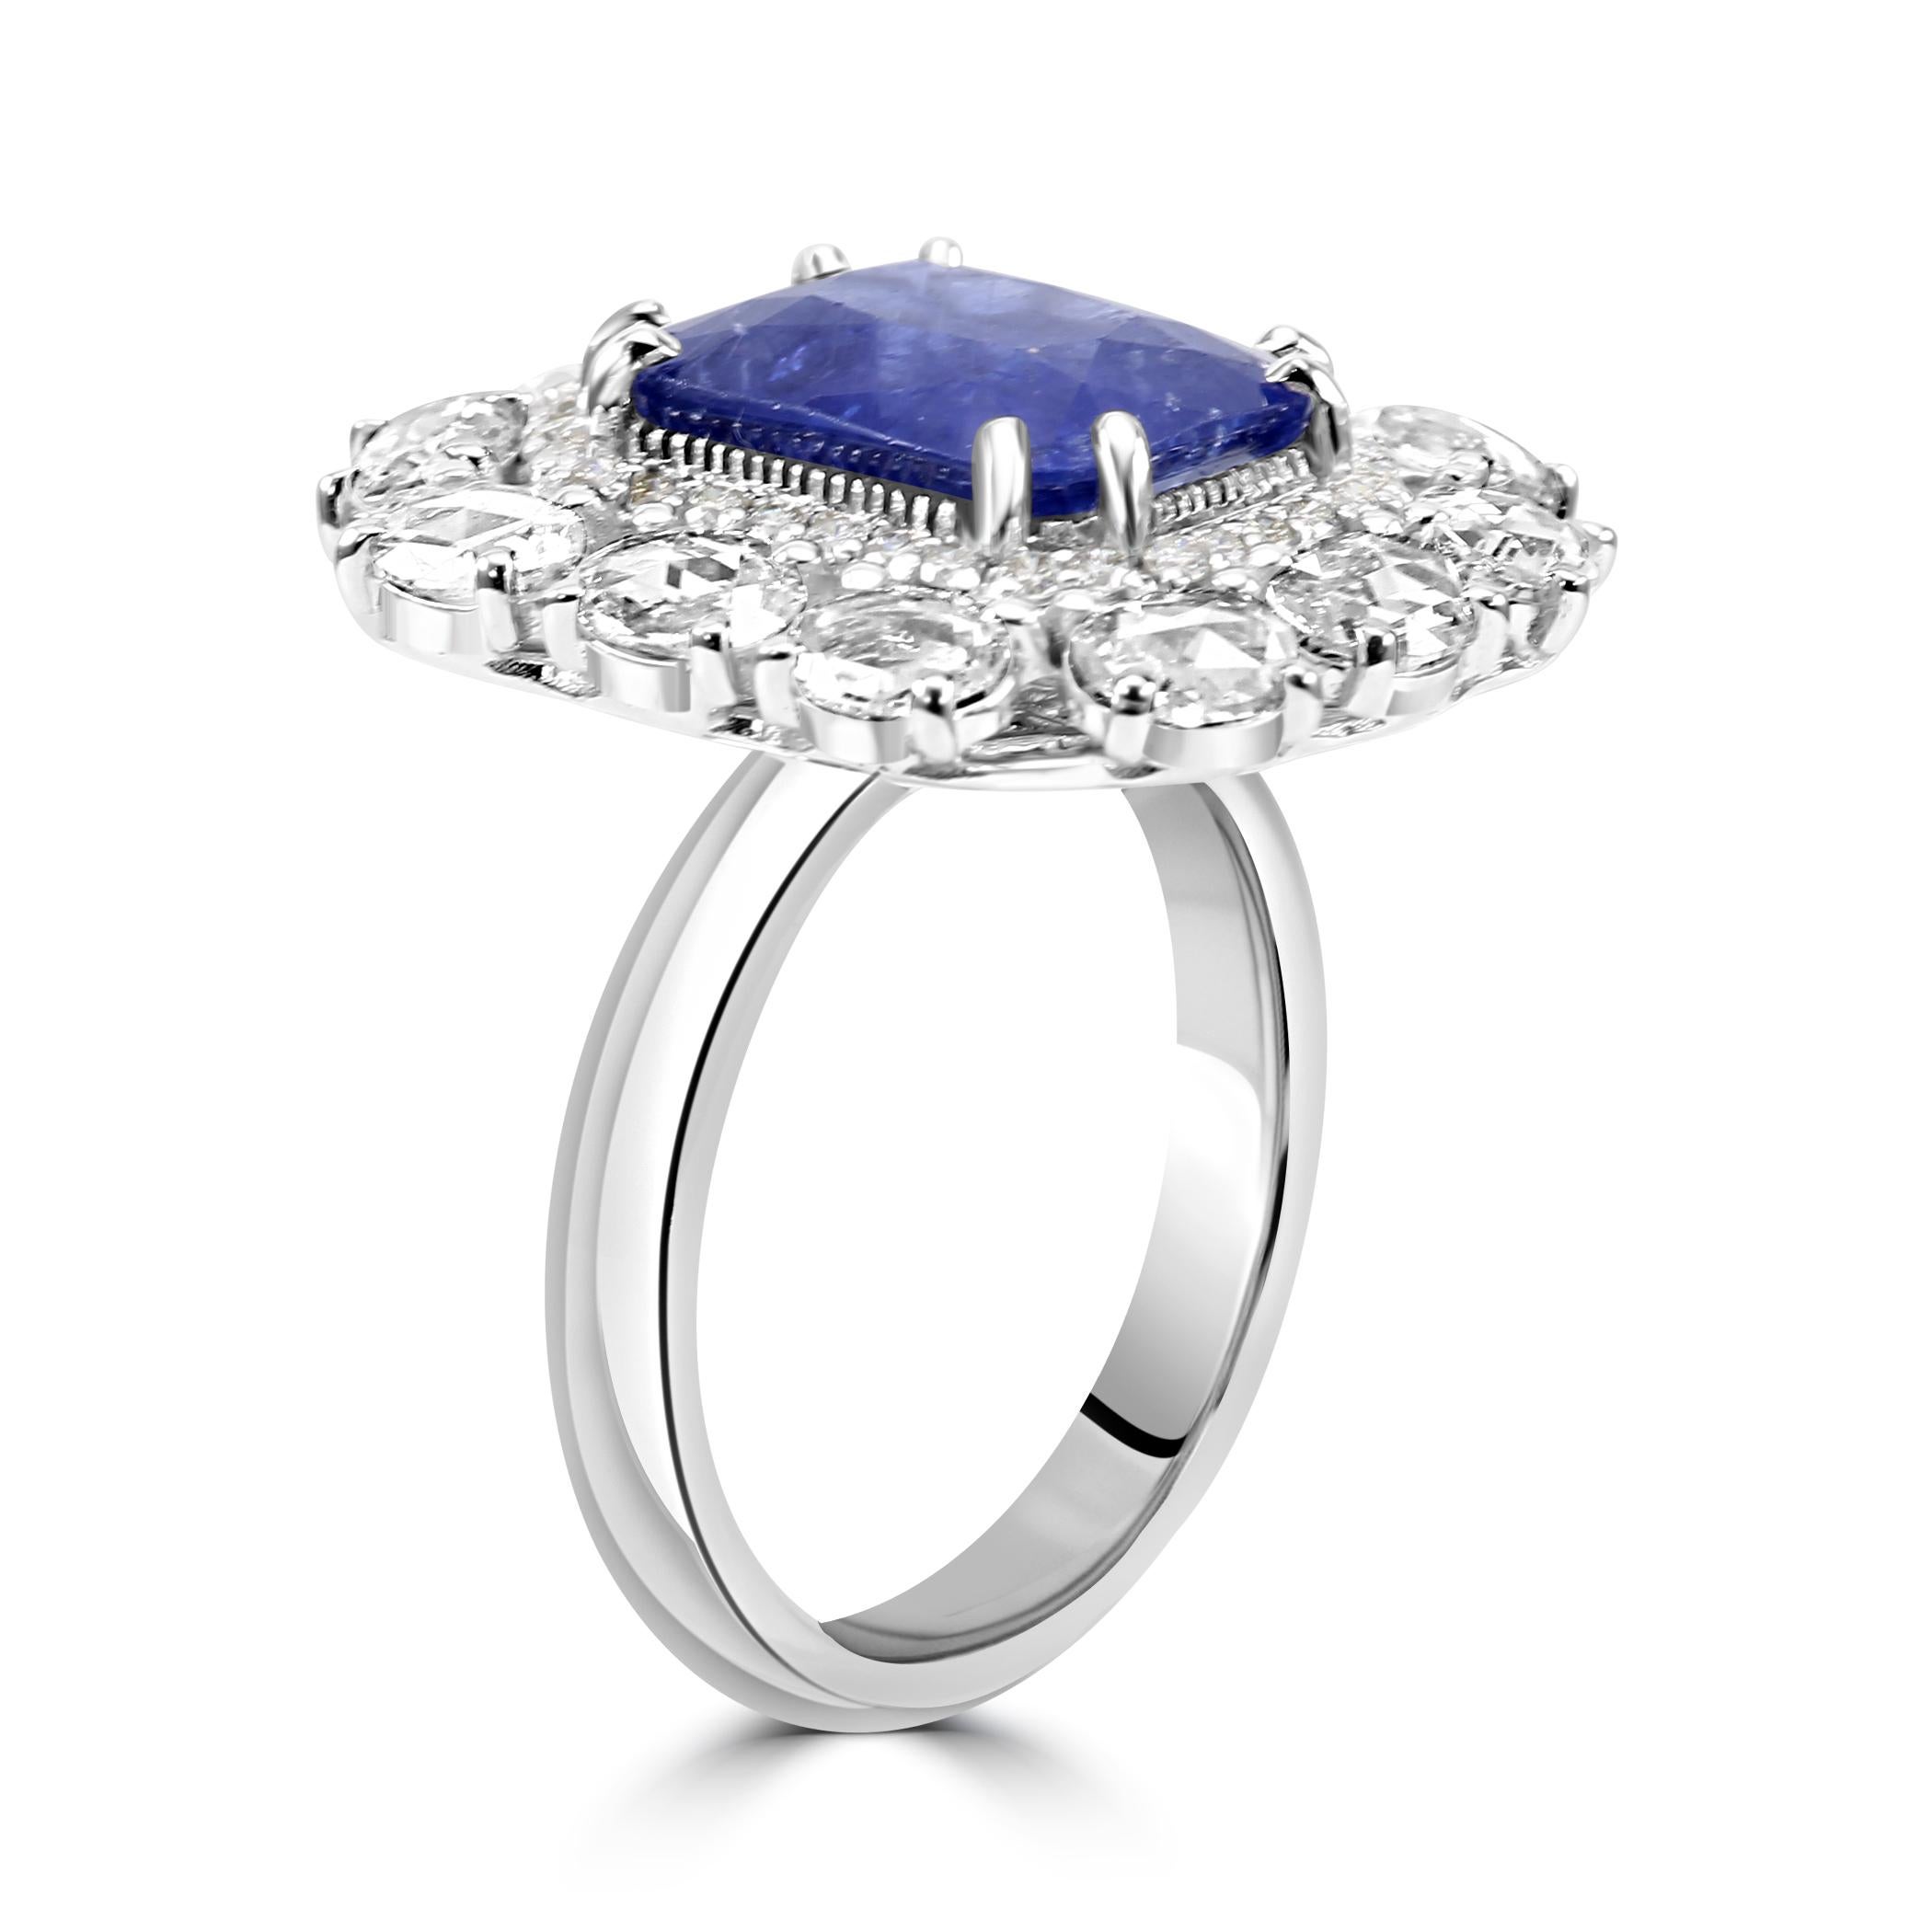 Ceylon Sapphire Diamond 18K White Gold Art Deco Bridal Engagement Halo Ring  In New Condition For Sale In Sayreville, NJ